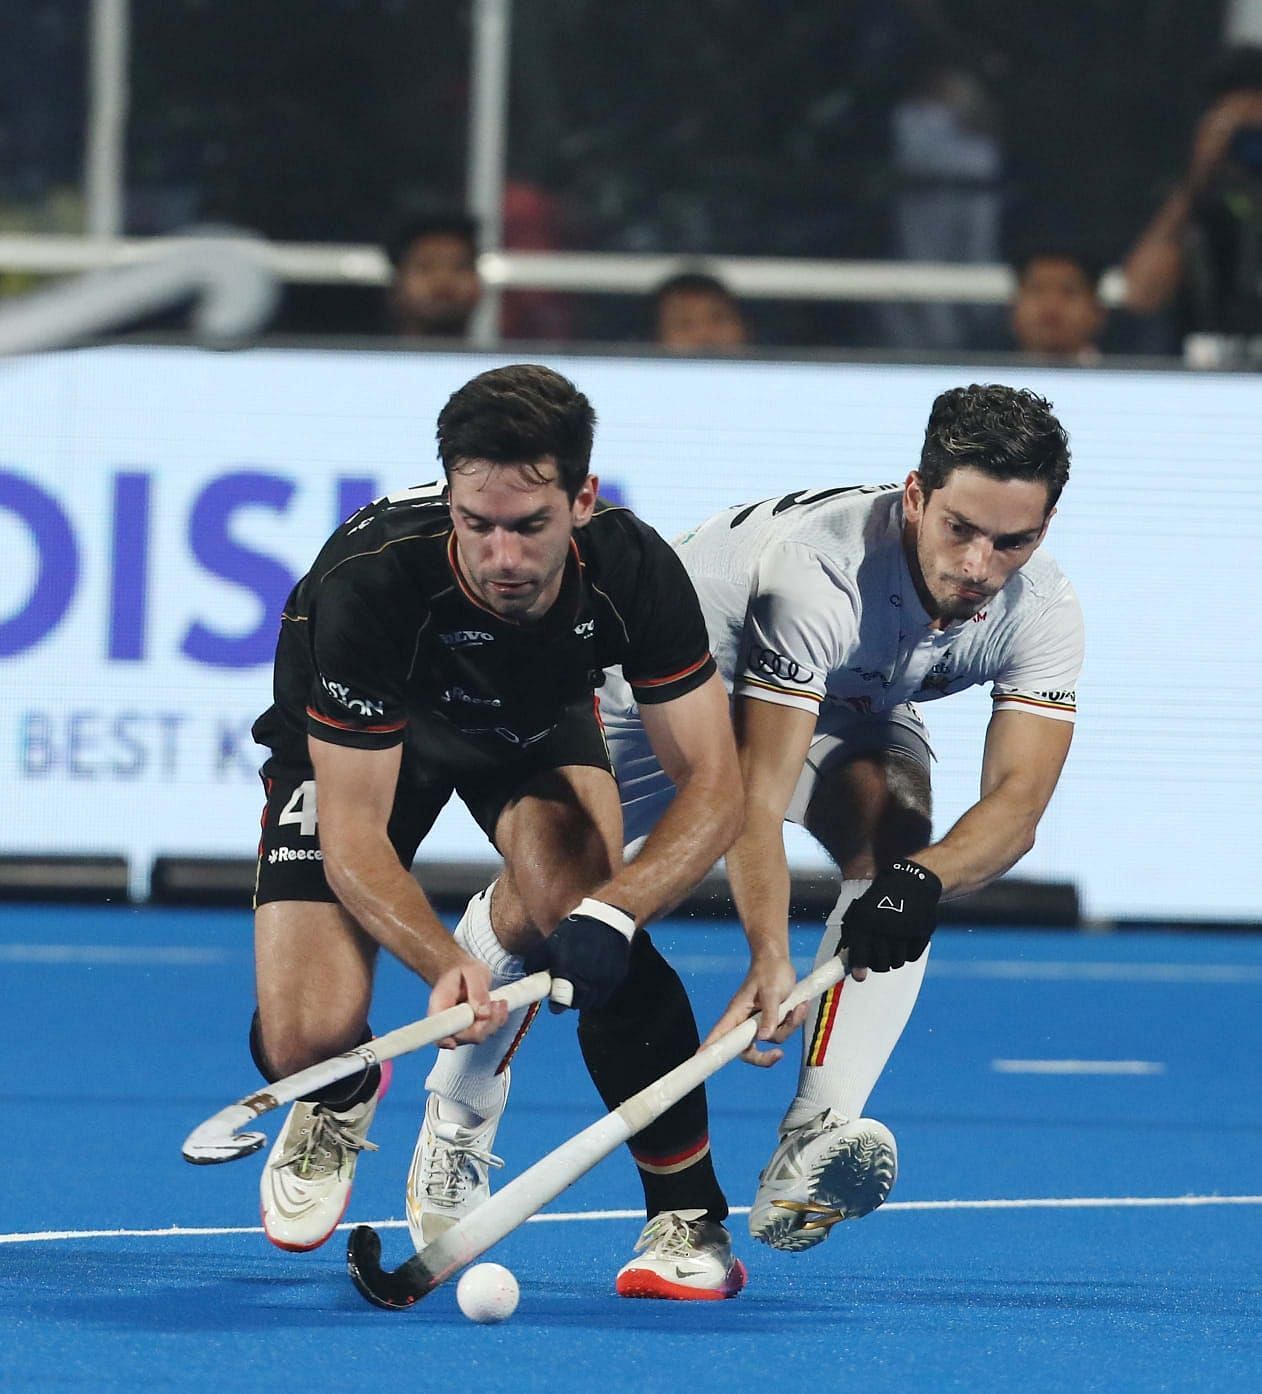 Germany beat Belgium in a cattle of the titans Image Ctsy: Hockey India